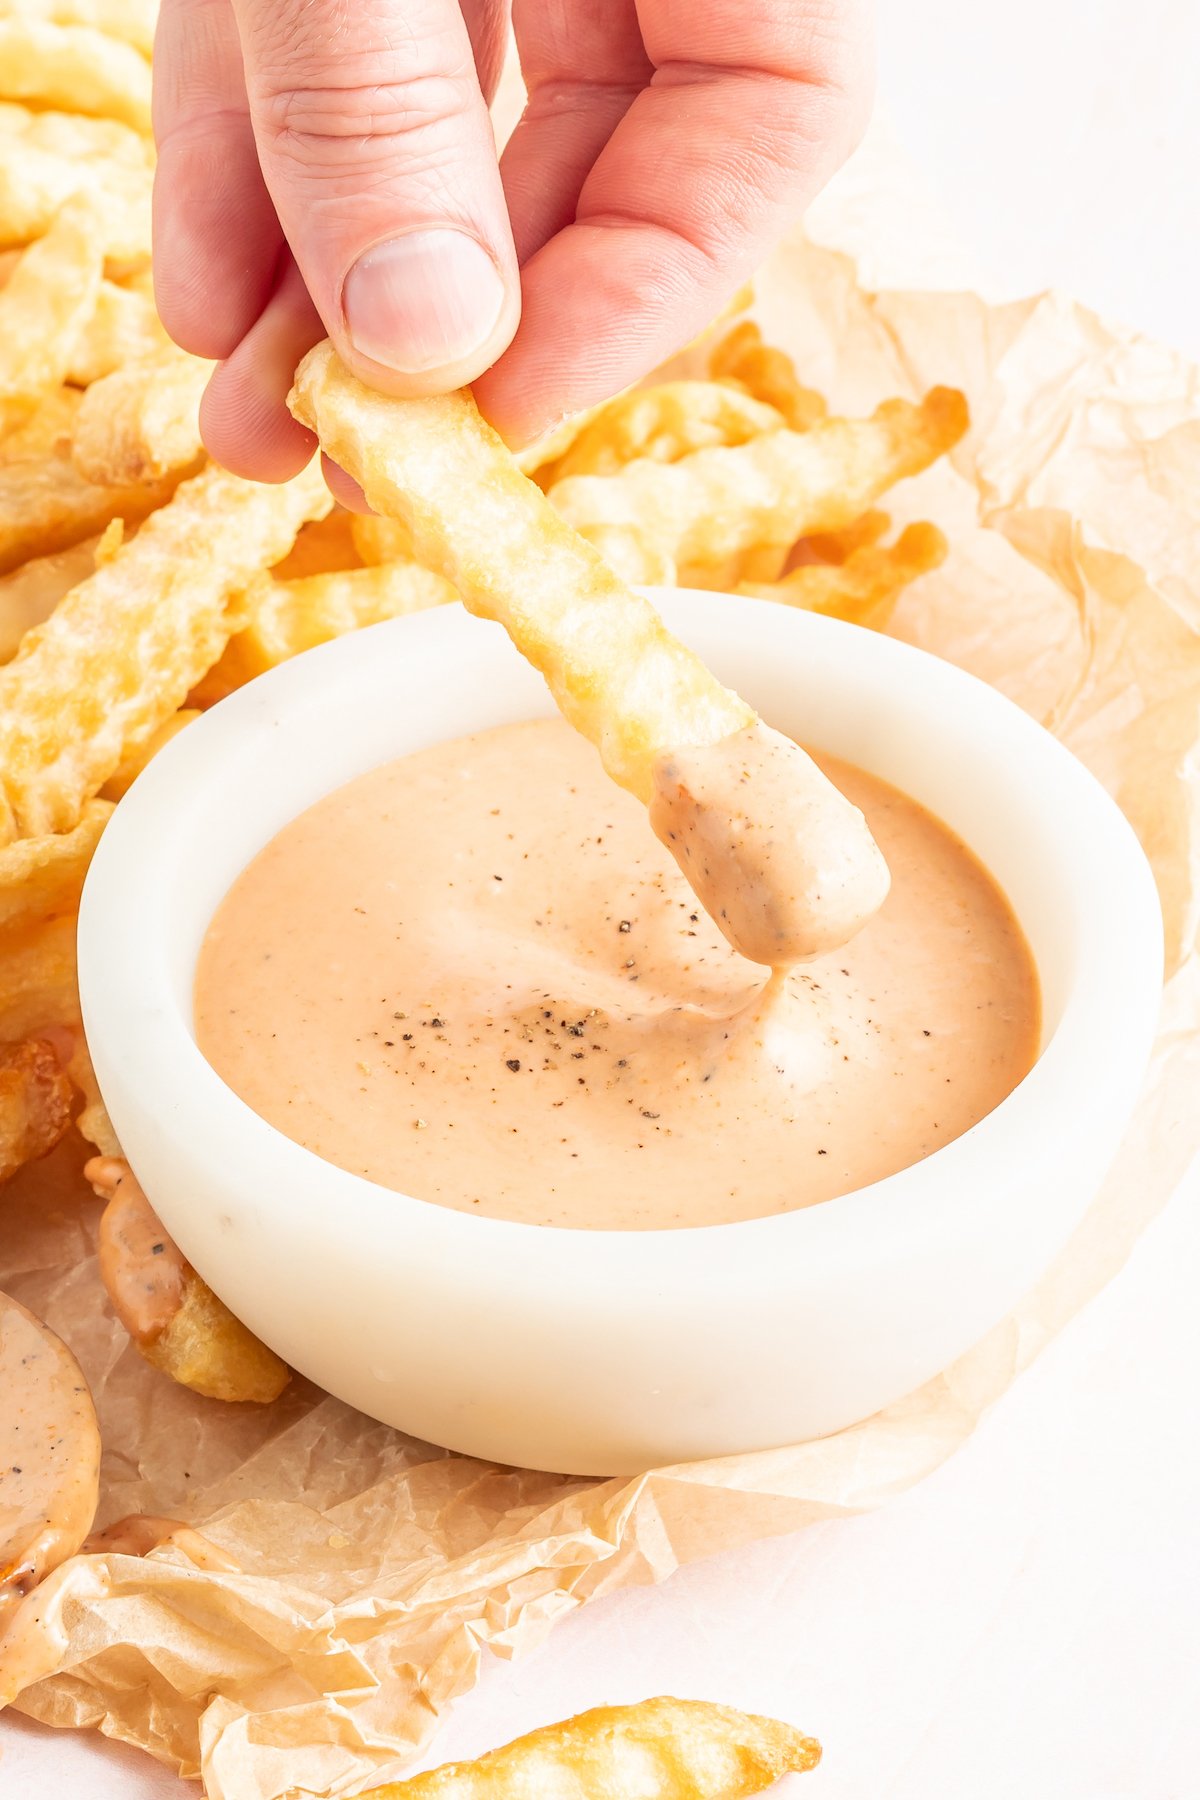 A french fry being dipped into homemade Zax sauce.